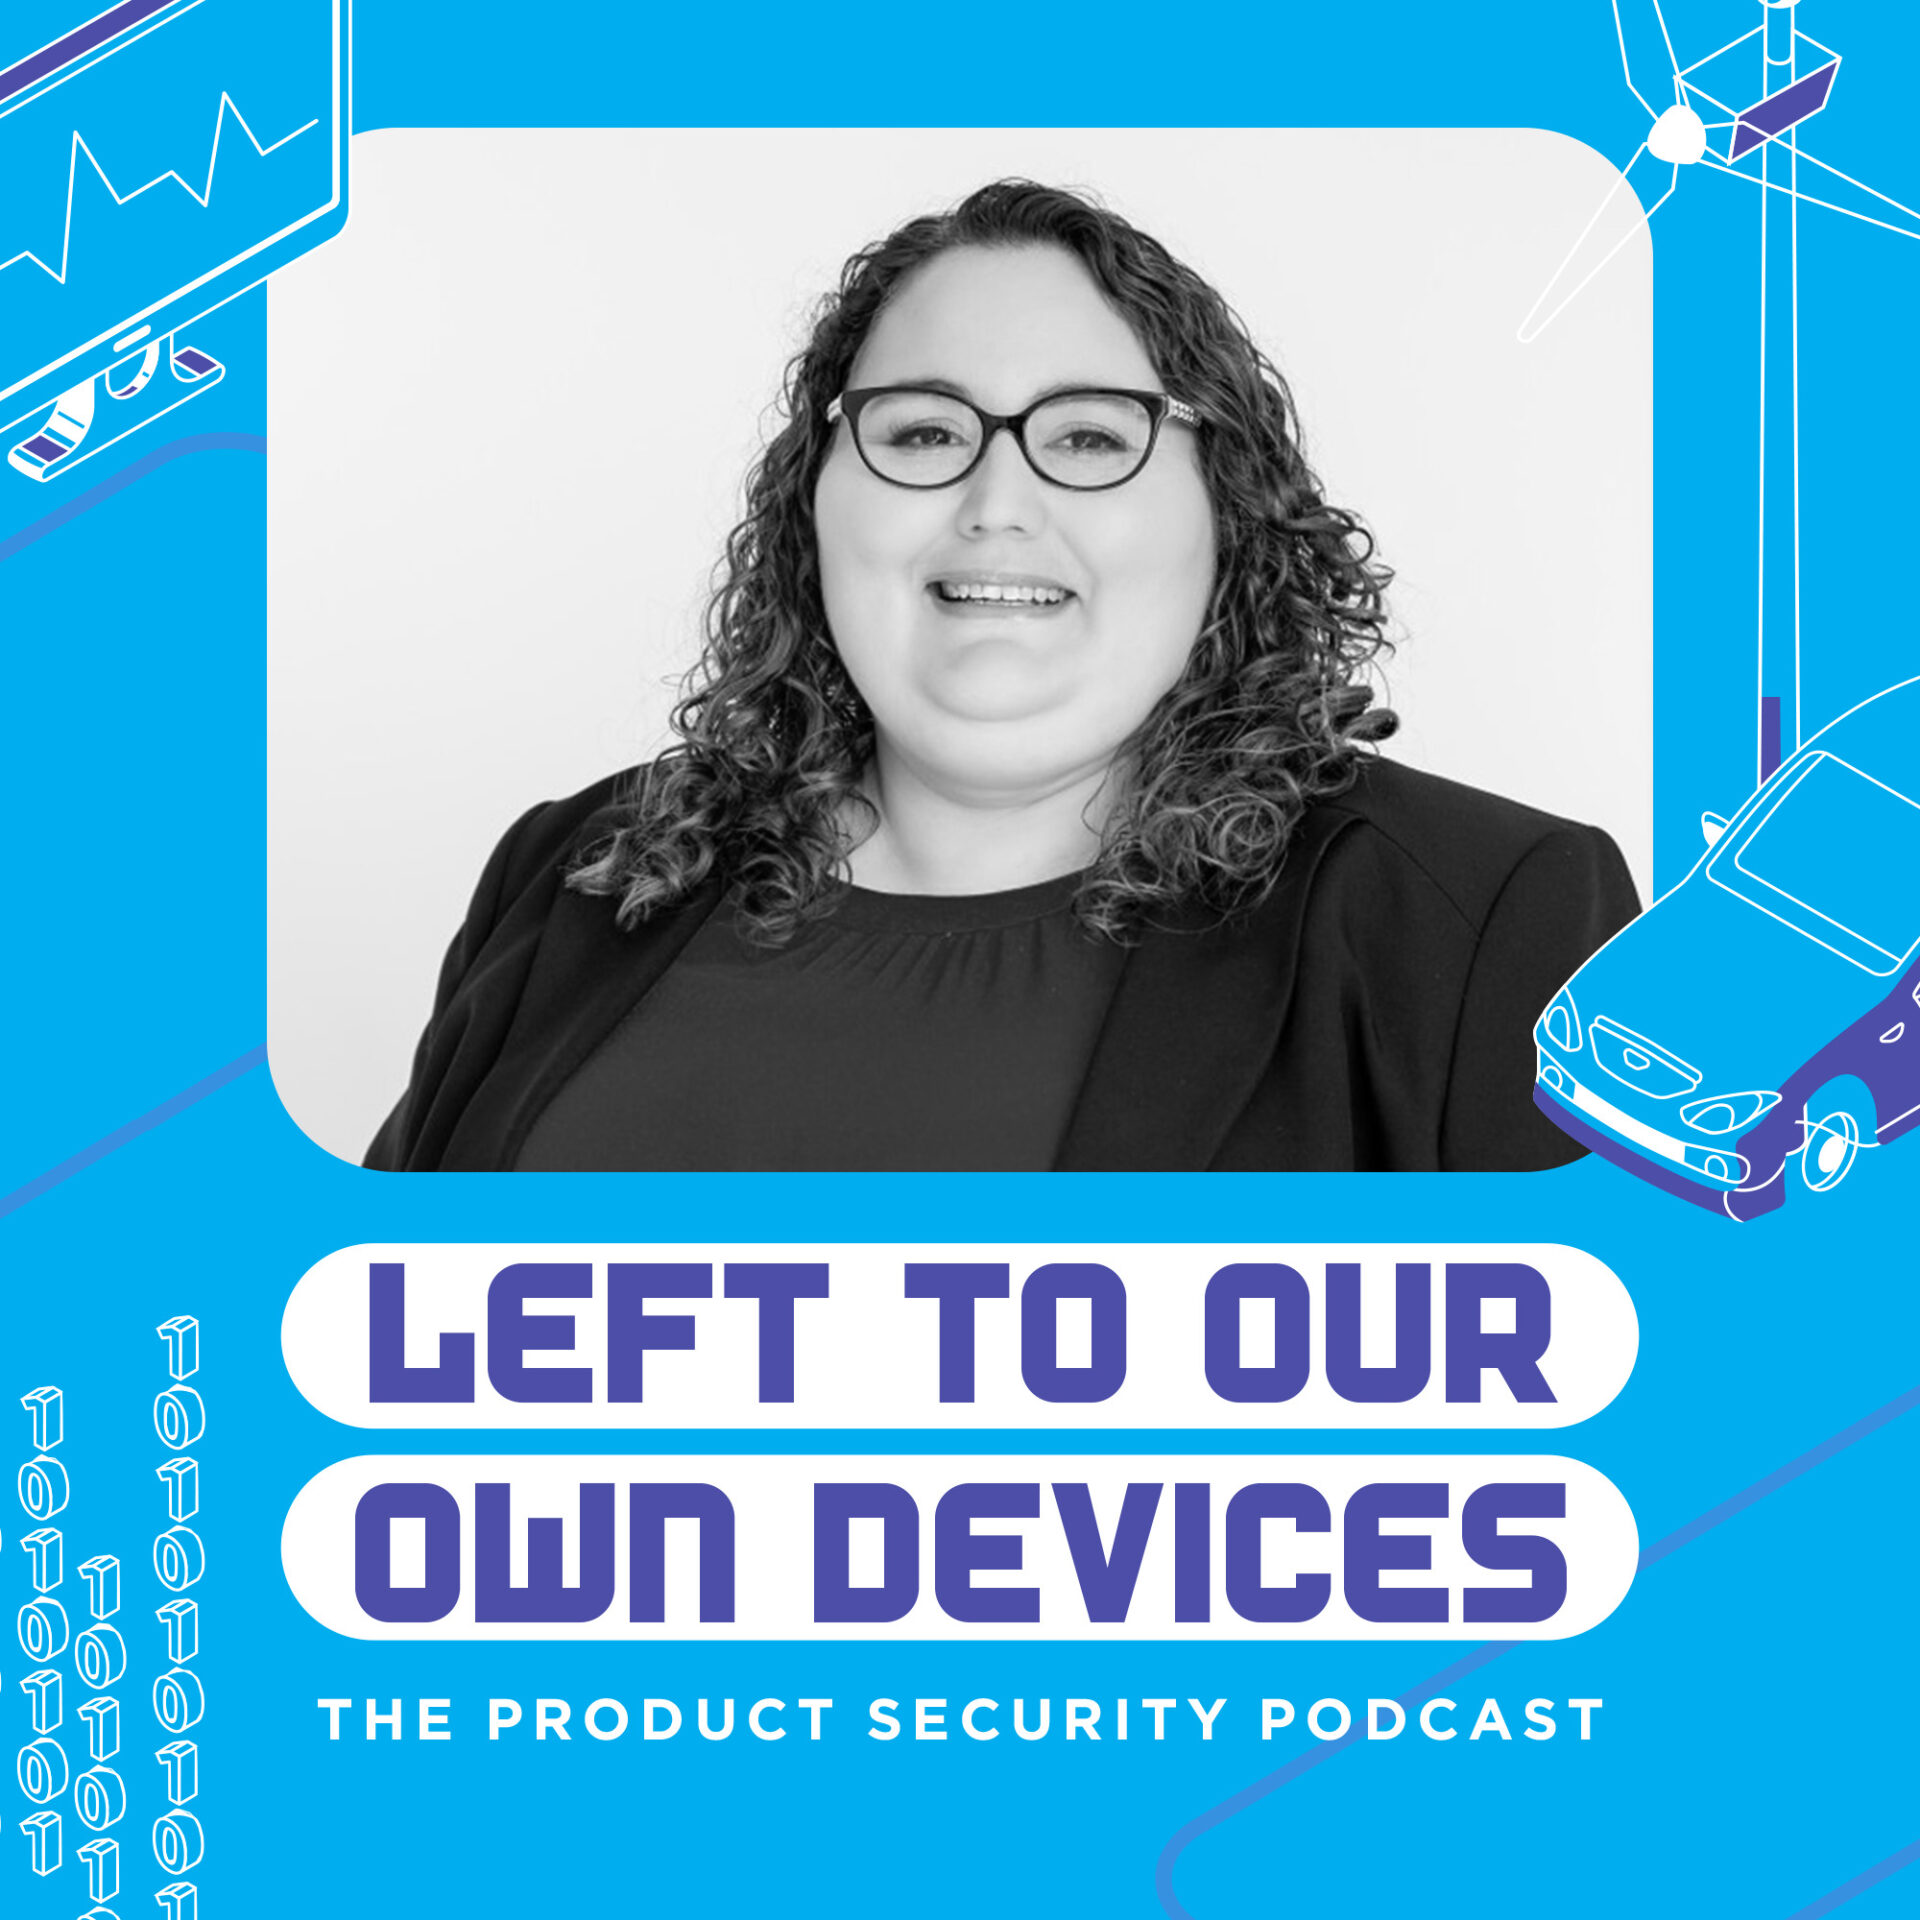 #38: Helen Negre: On Product Security, Psychology and Personal Growth